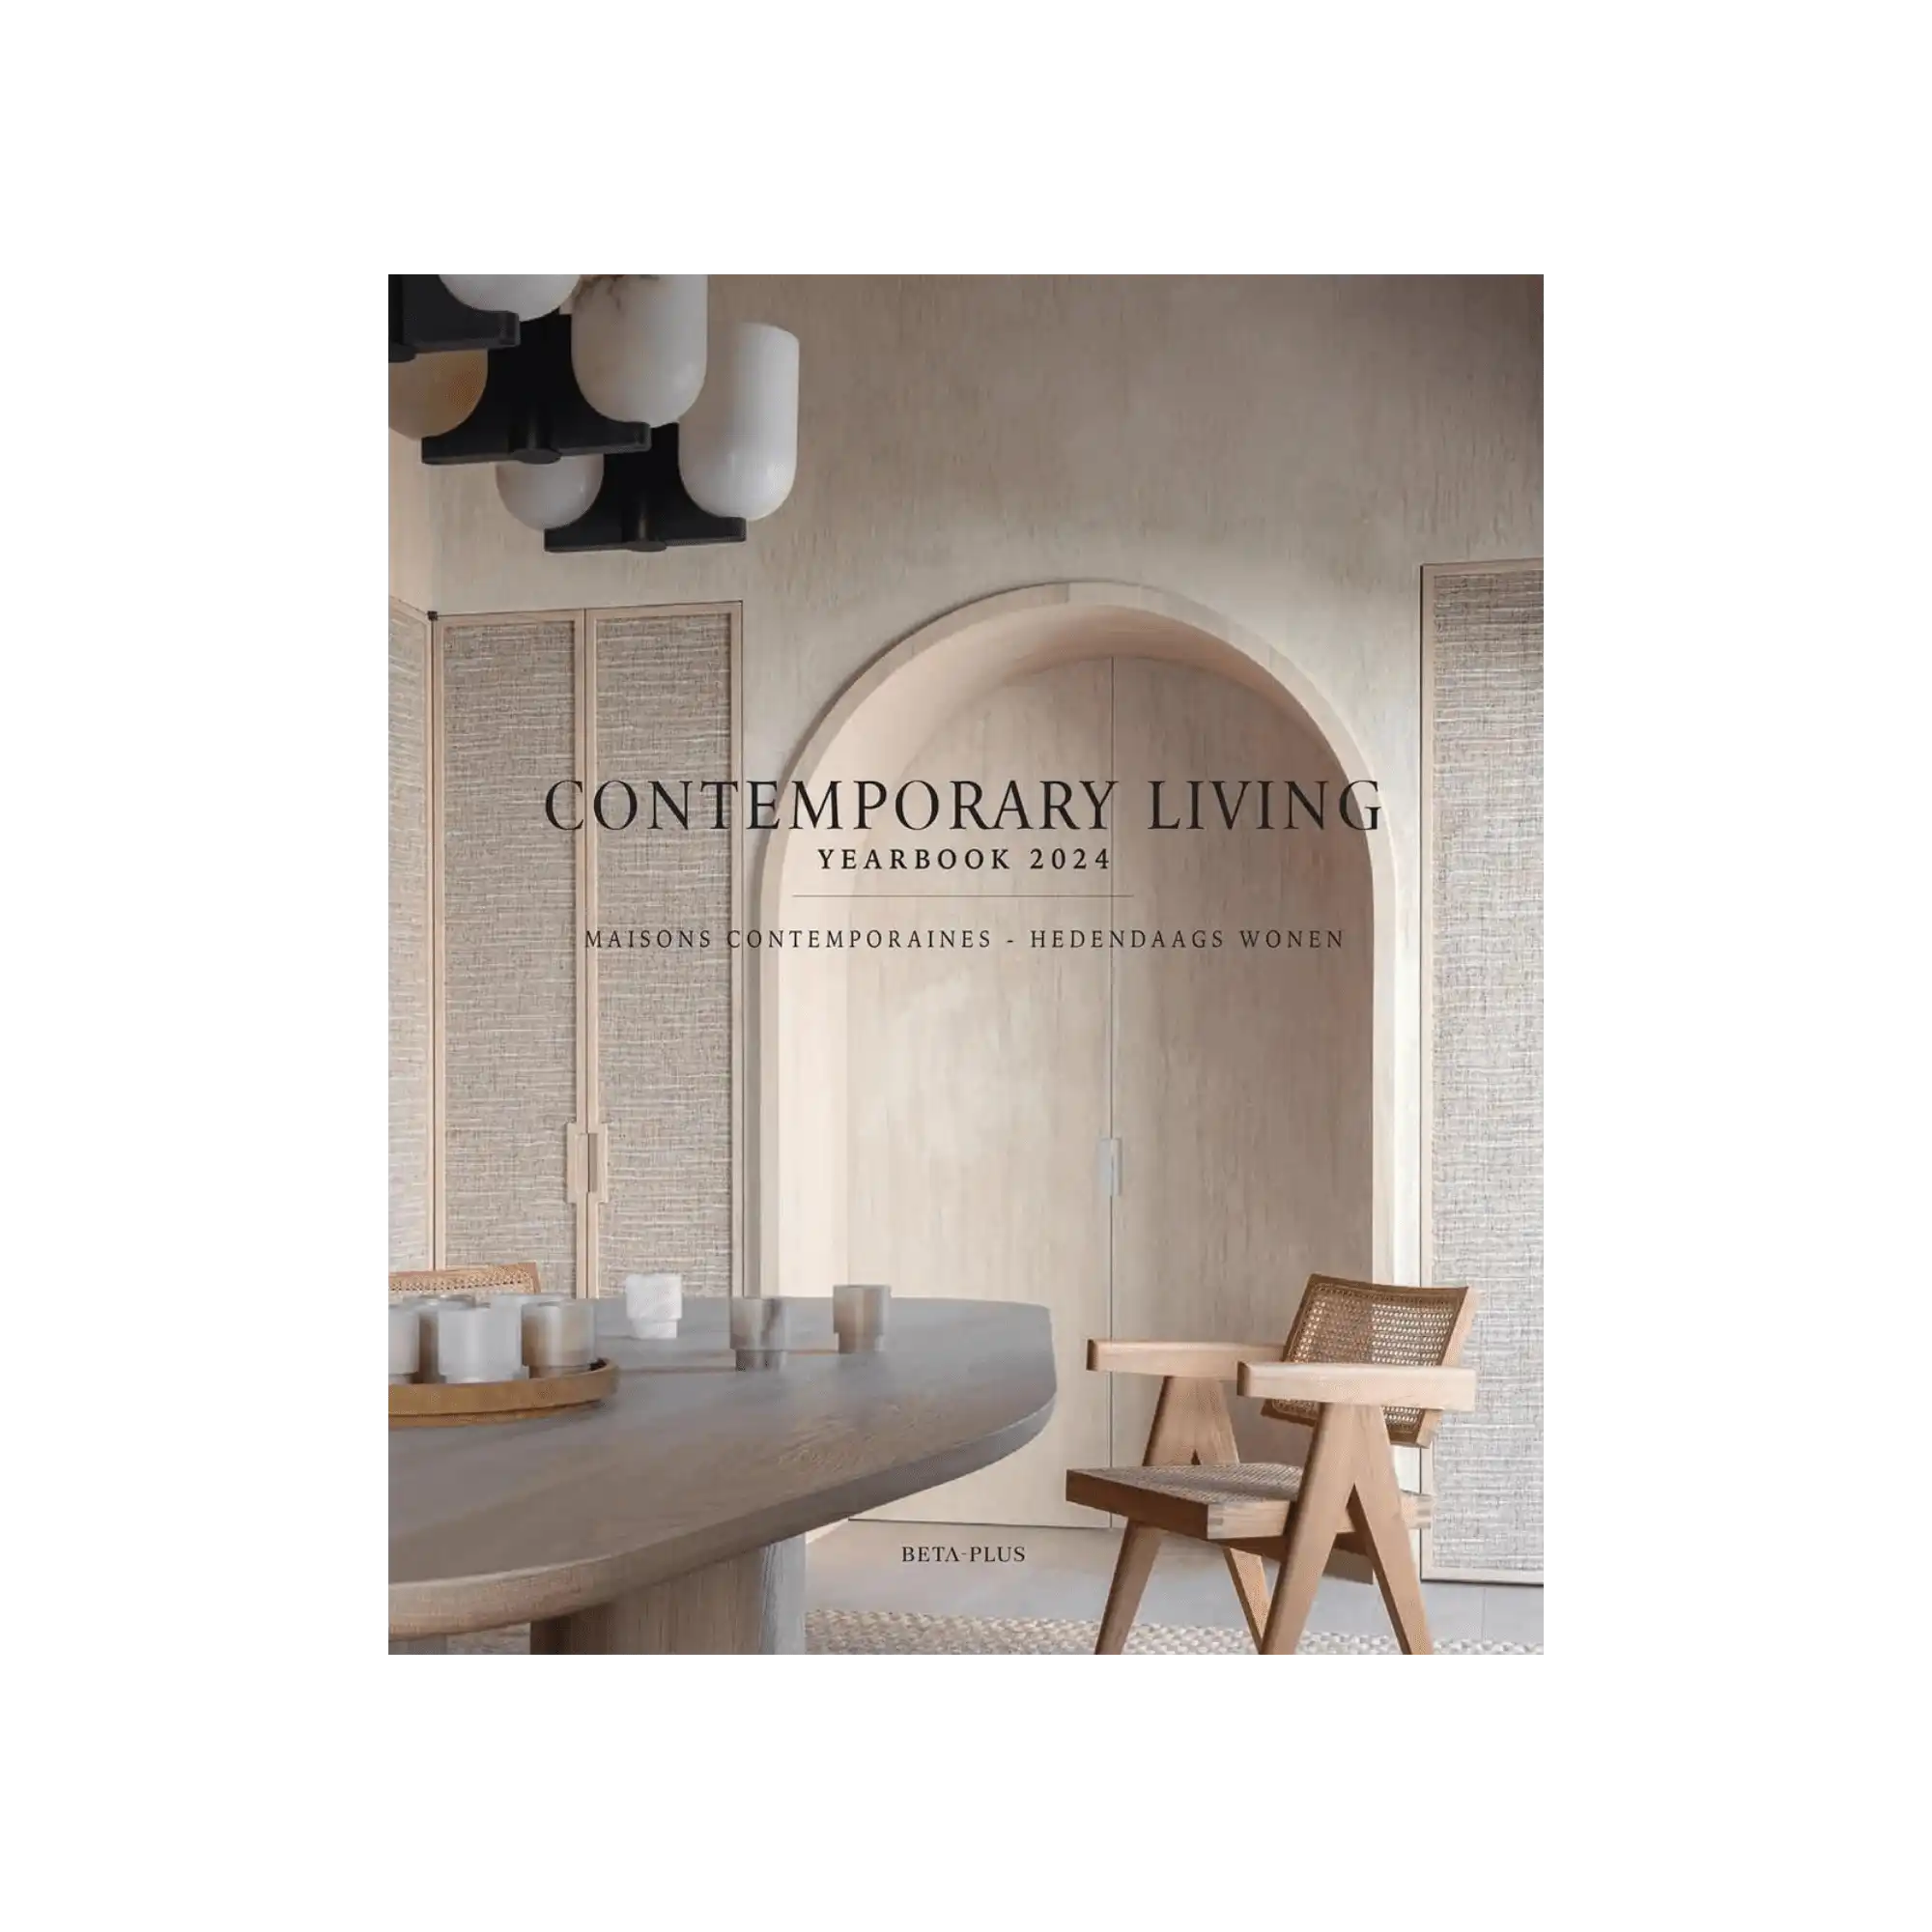 Contemporary Living Yearbook 2024 - THAT COOL LIVING